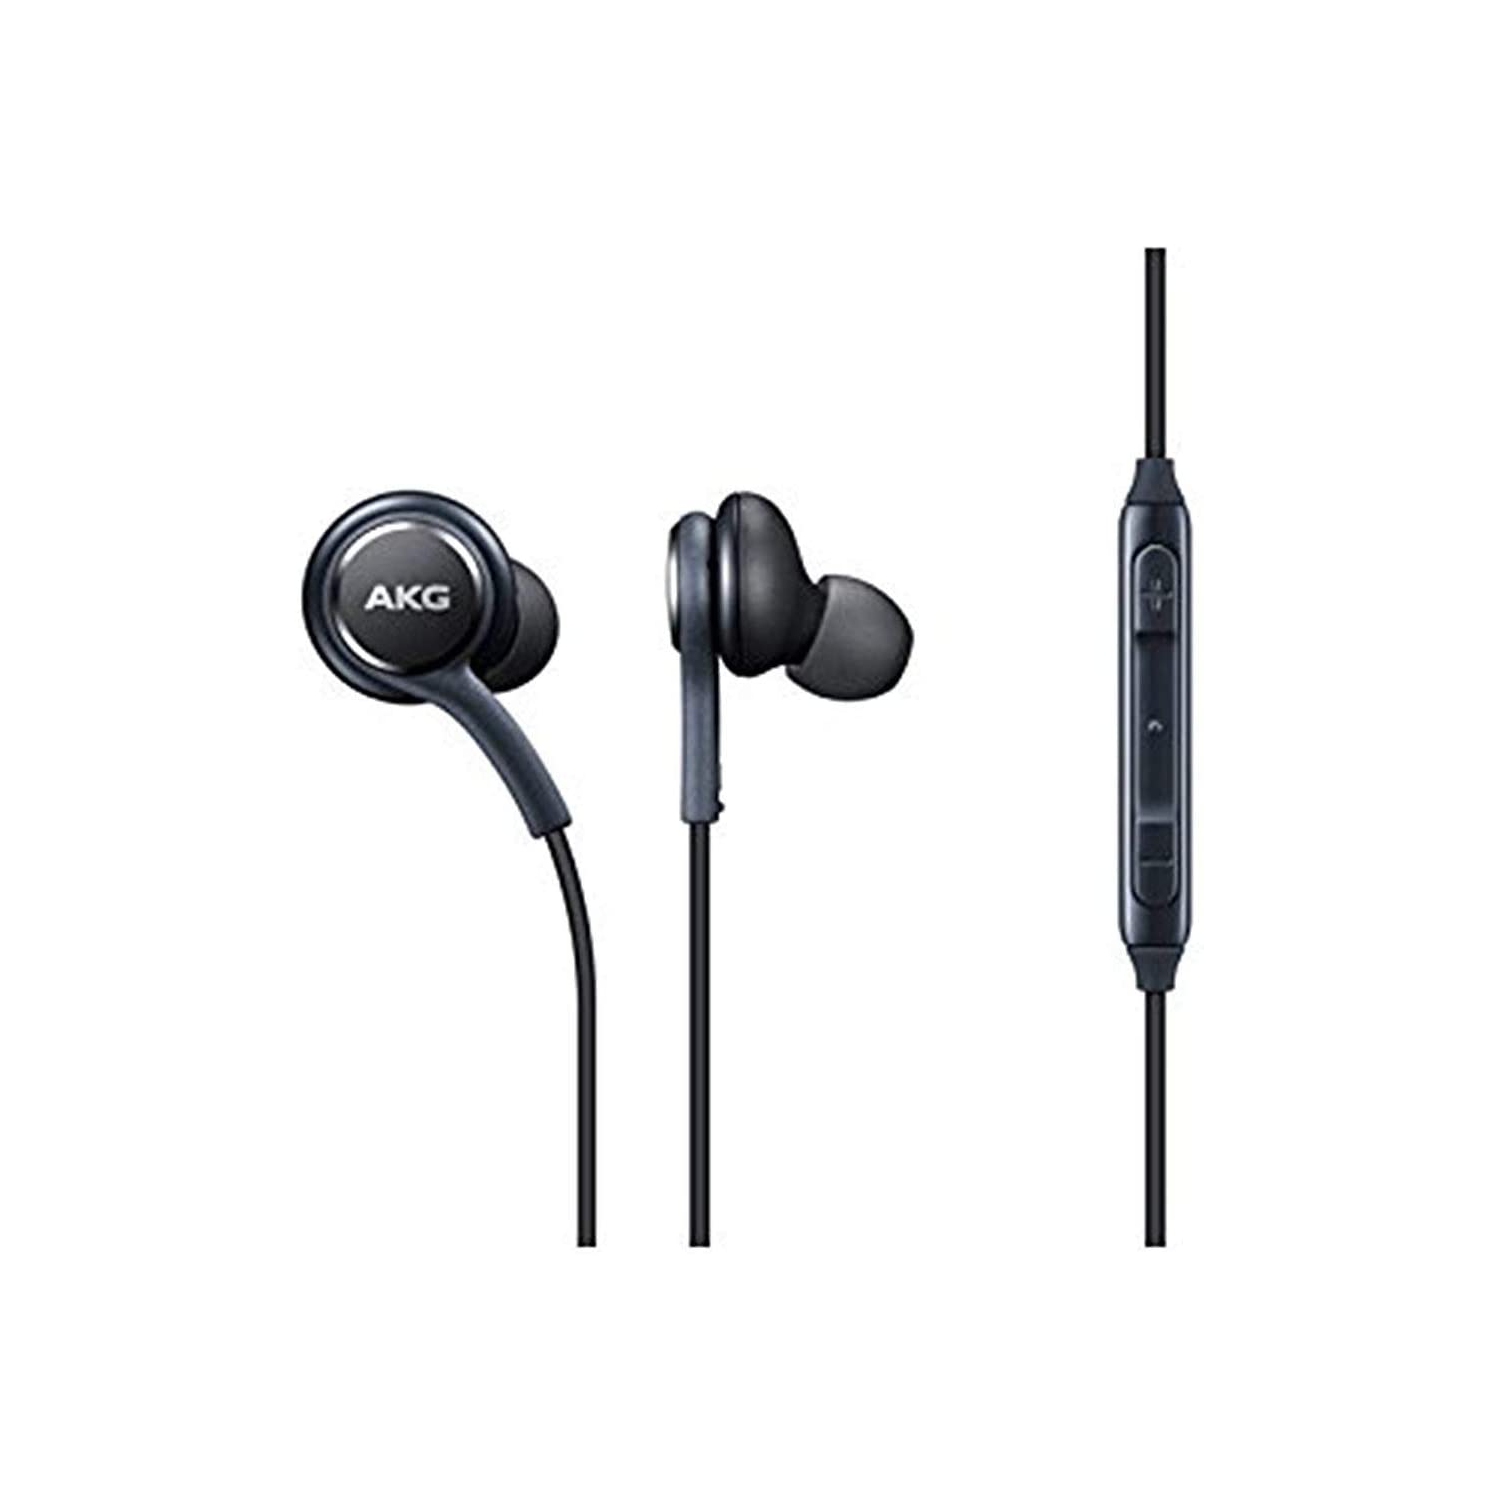 |HWS| (3 Pack) 3.5mm OEM Stereo Headphones w/Microphone for Samsung Galaxy S8 S9 S8 Plus S9 Plus Note 8 - Designed by AKG - 100% Original